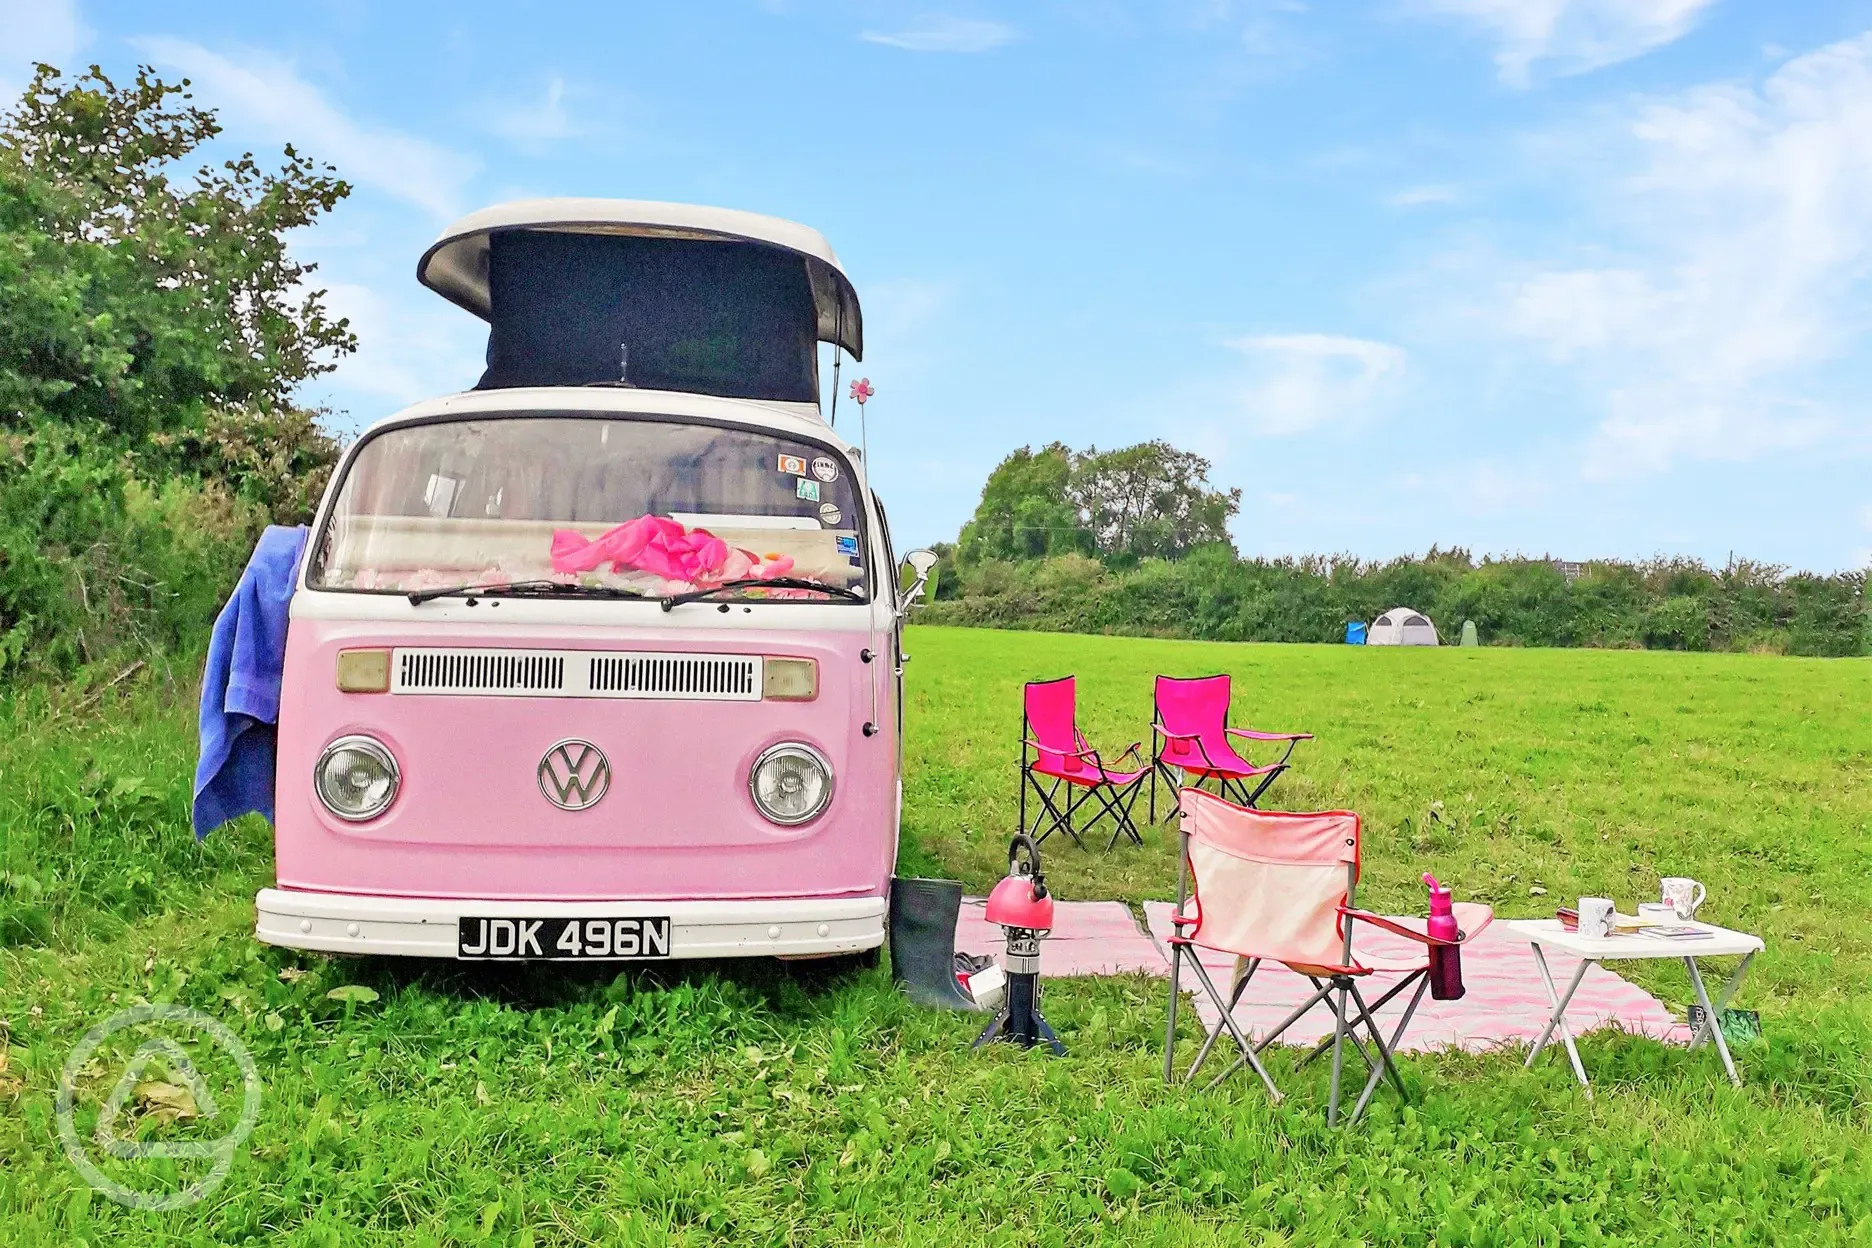 Campervan pitch, and probably our favourite set up!